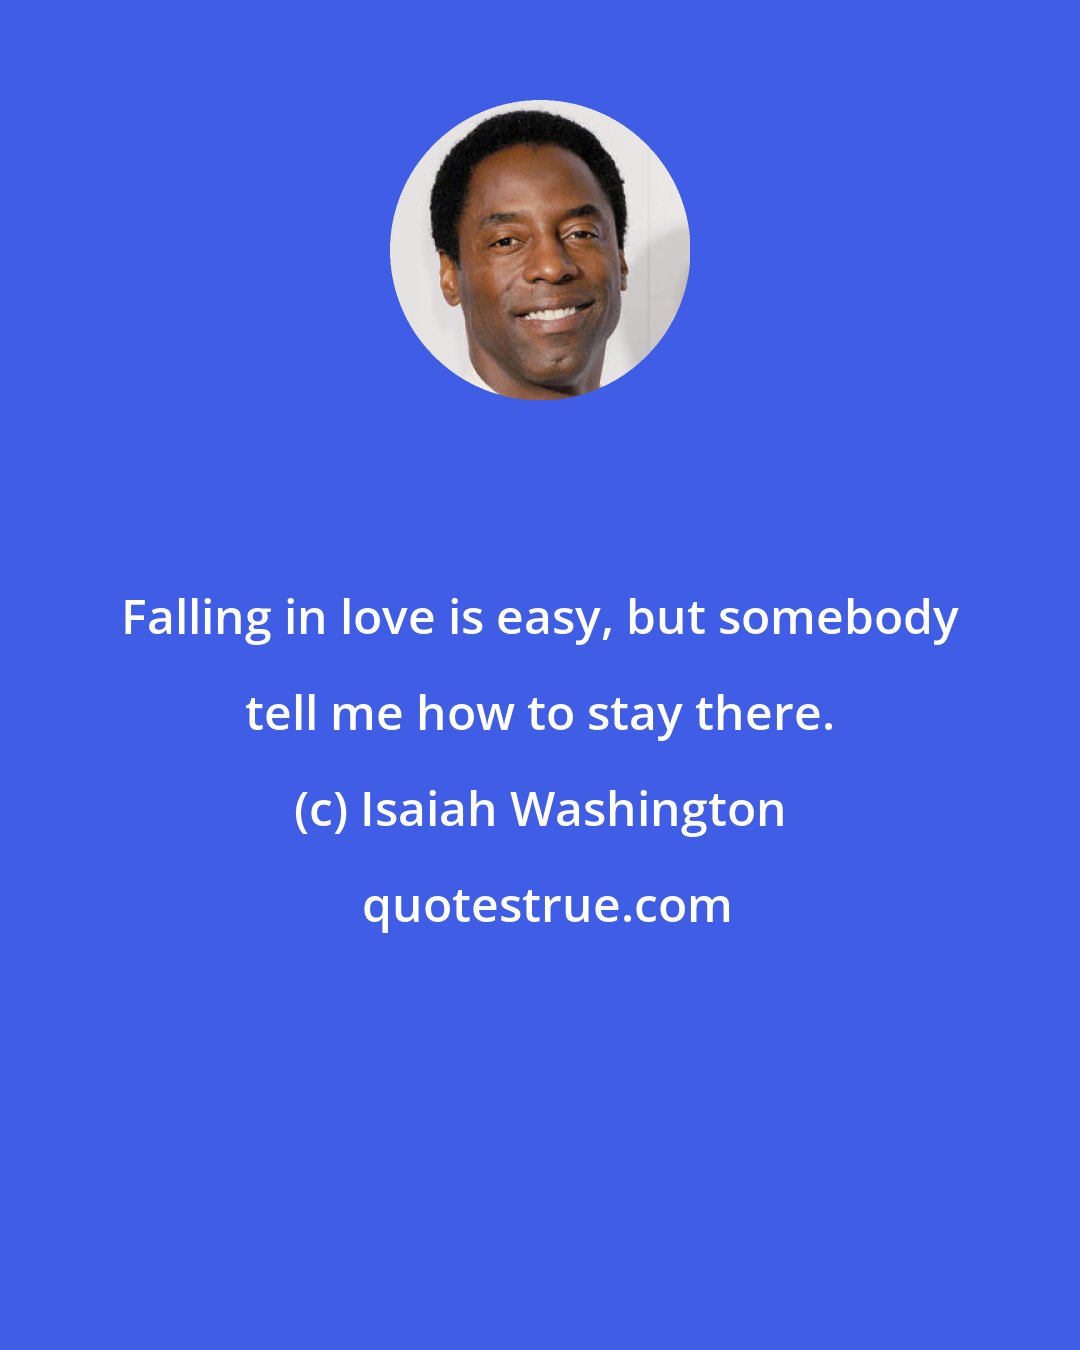 Isaiah Washington: Falling in love is easy, but somebody tell me how to stay there.